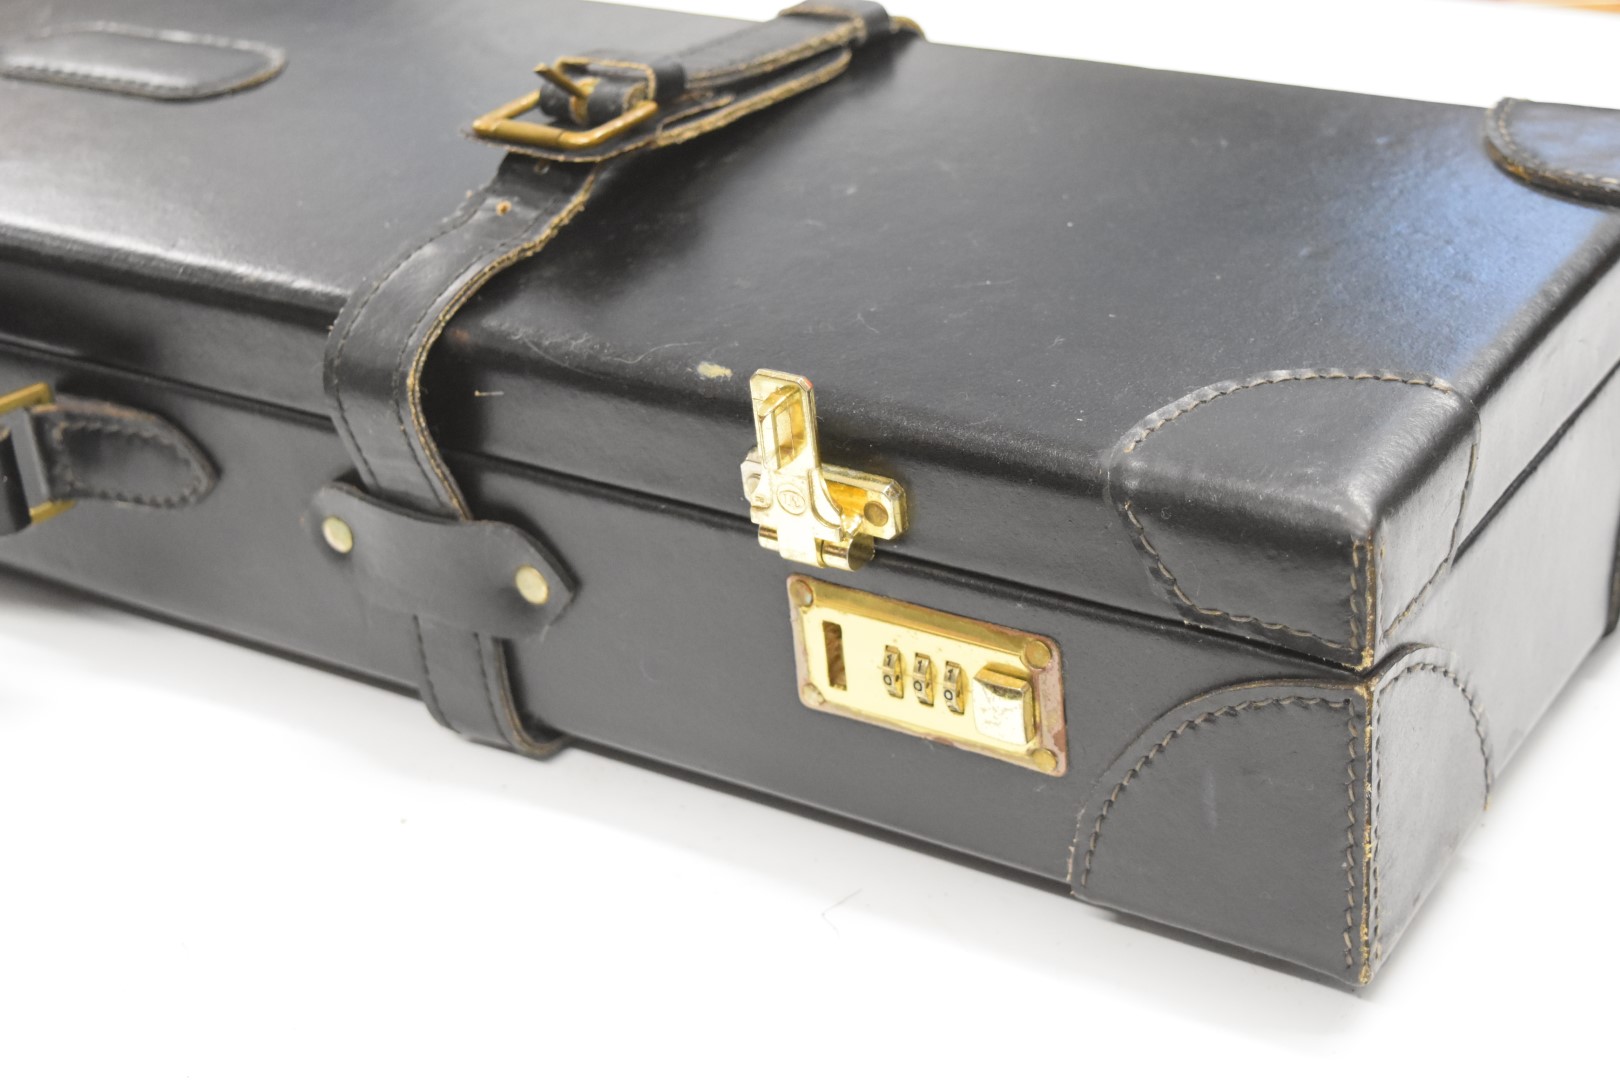 Black leather shotgun case with fitted interior and code locks, 82.5 x 21 x 11cm. - Image 3 of 5